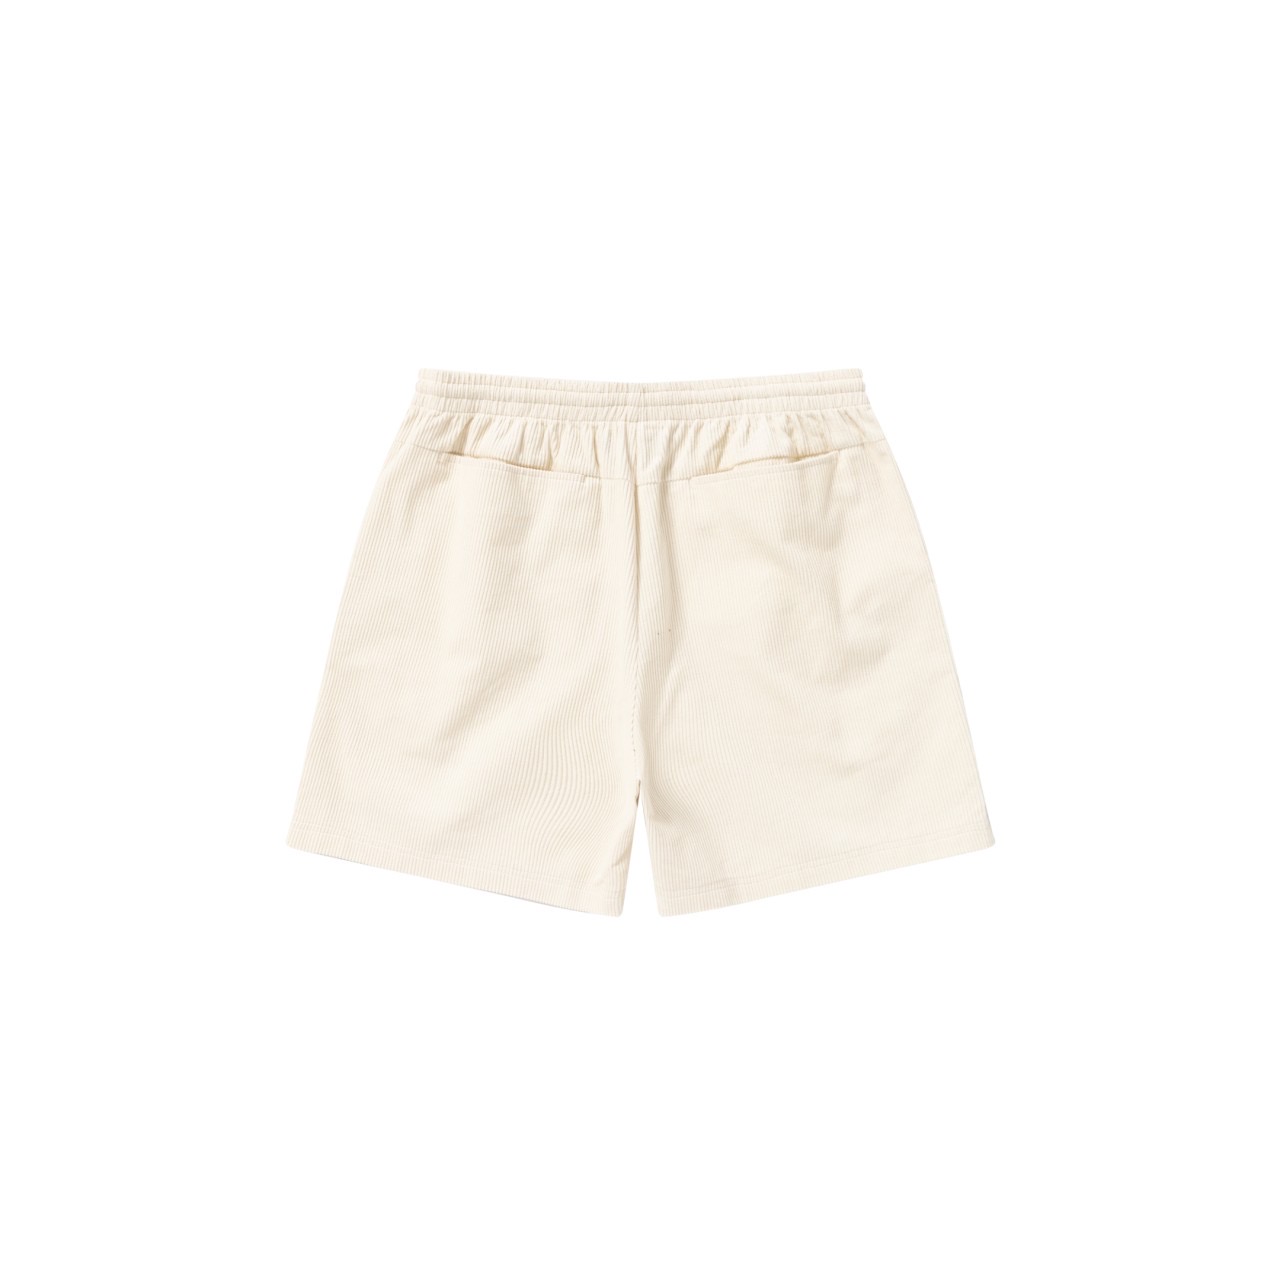 BLACK EYE PATCH (OE LOGO EMBROIDERED CORDUROY SHORTS) OFF WHITE - FAMLEST